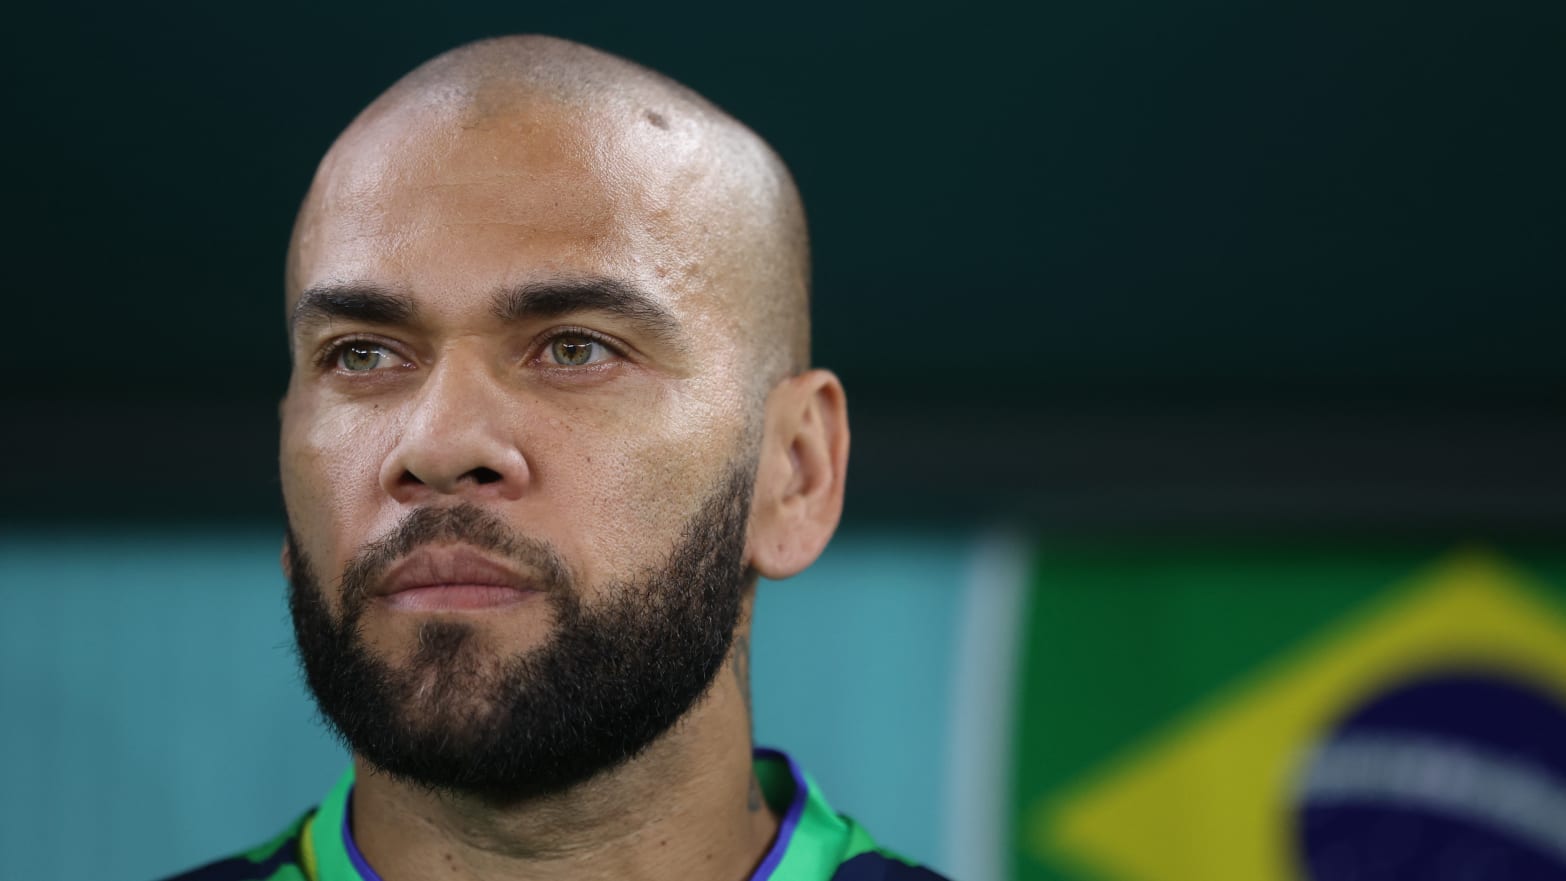 Dani Alves, the Brazil soccer legend, has been sentenced to four-and-a-half years in prison after being convicted of sexually assaulting a woman in a Barcelona nightclub. 